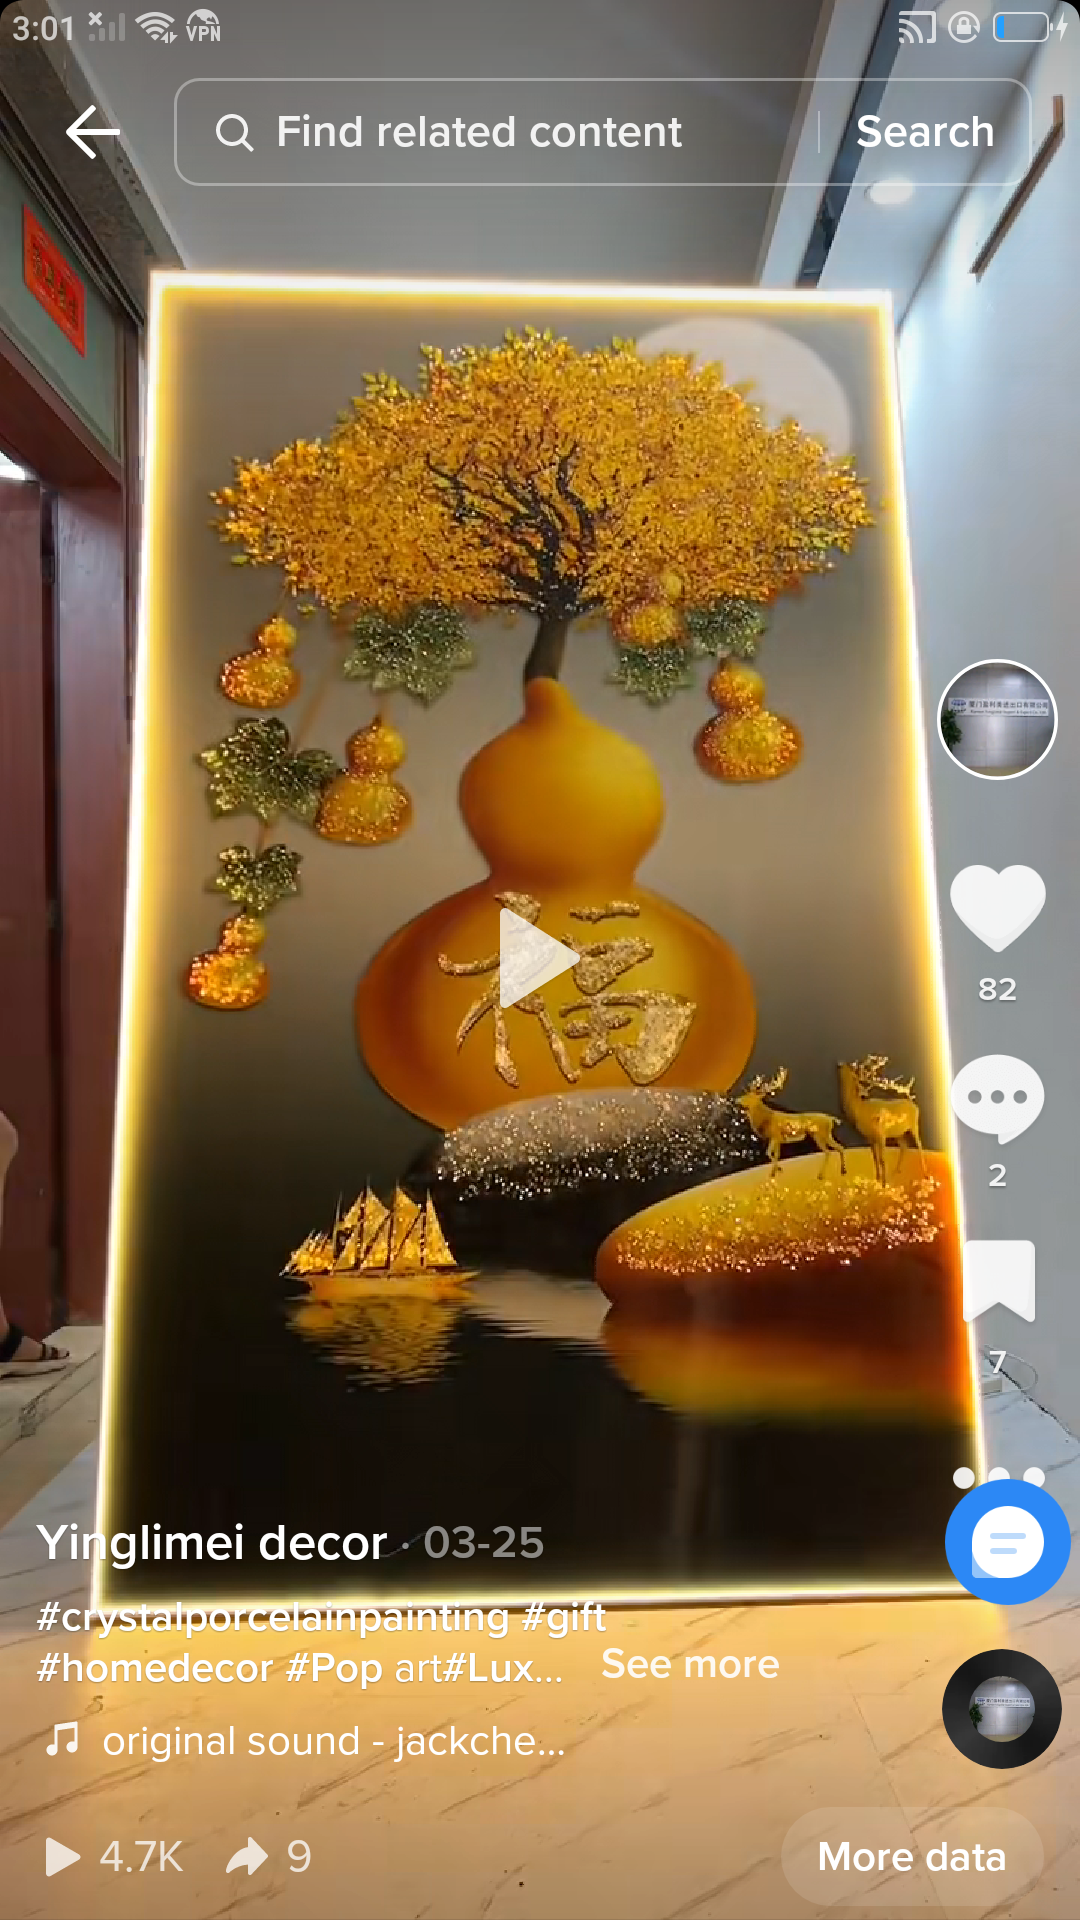 Decorative painting of money tree full of gold wallpainting.